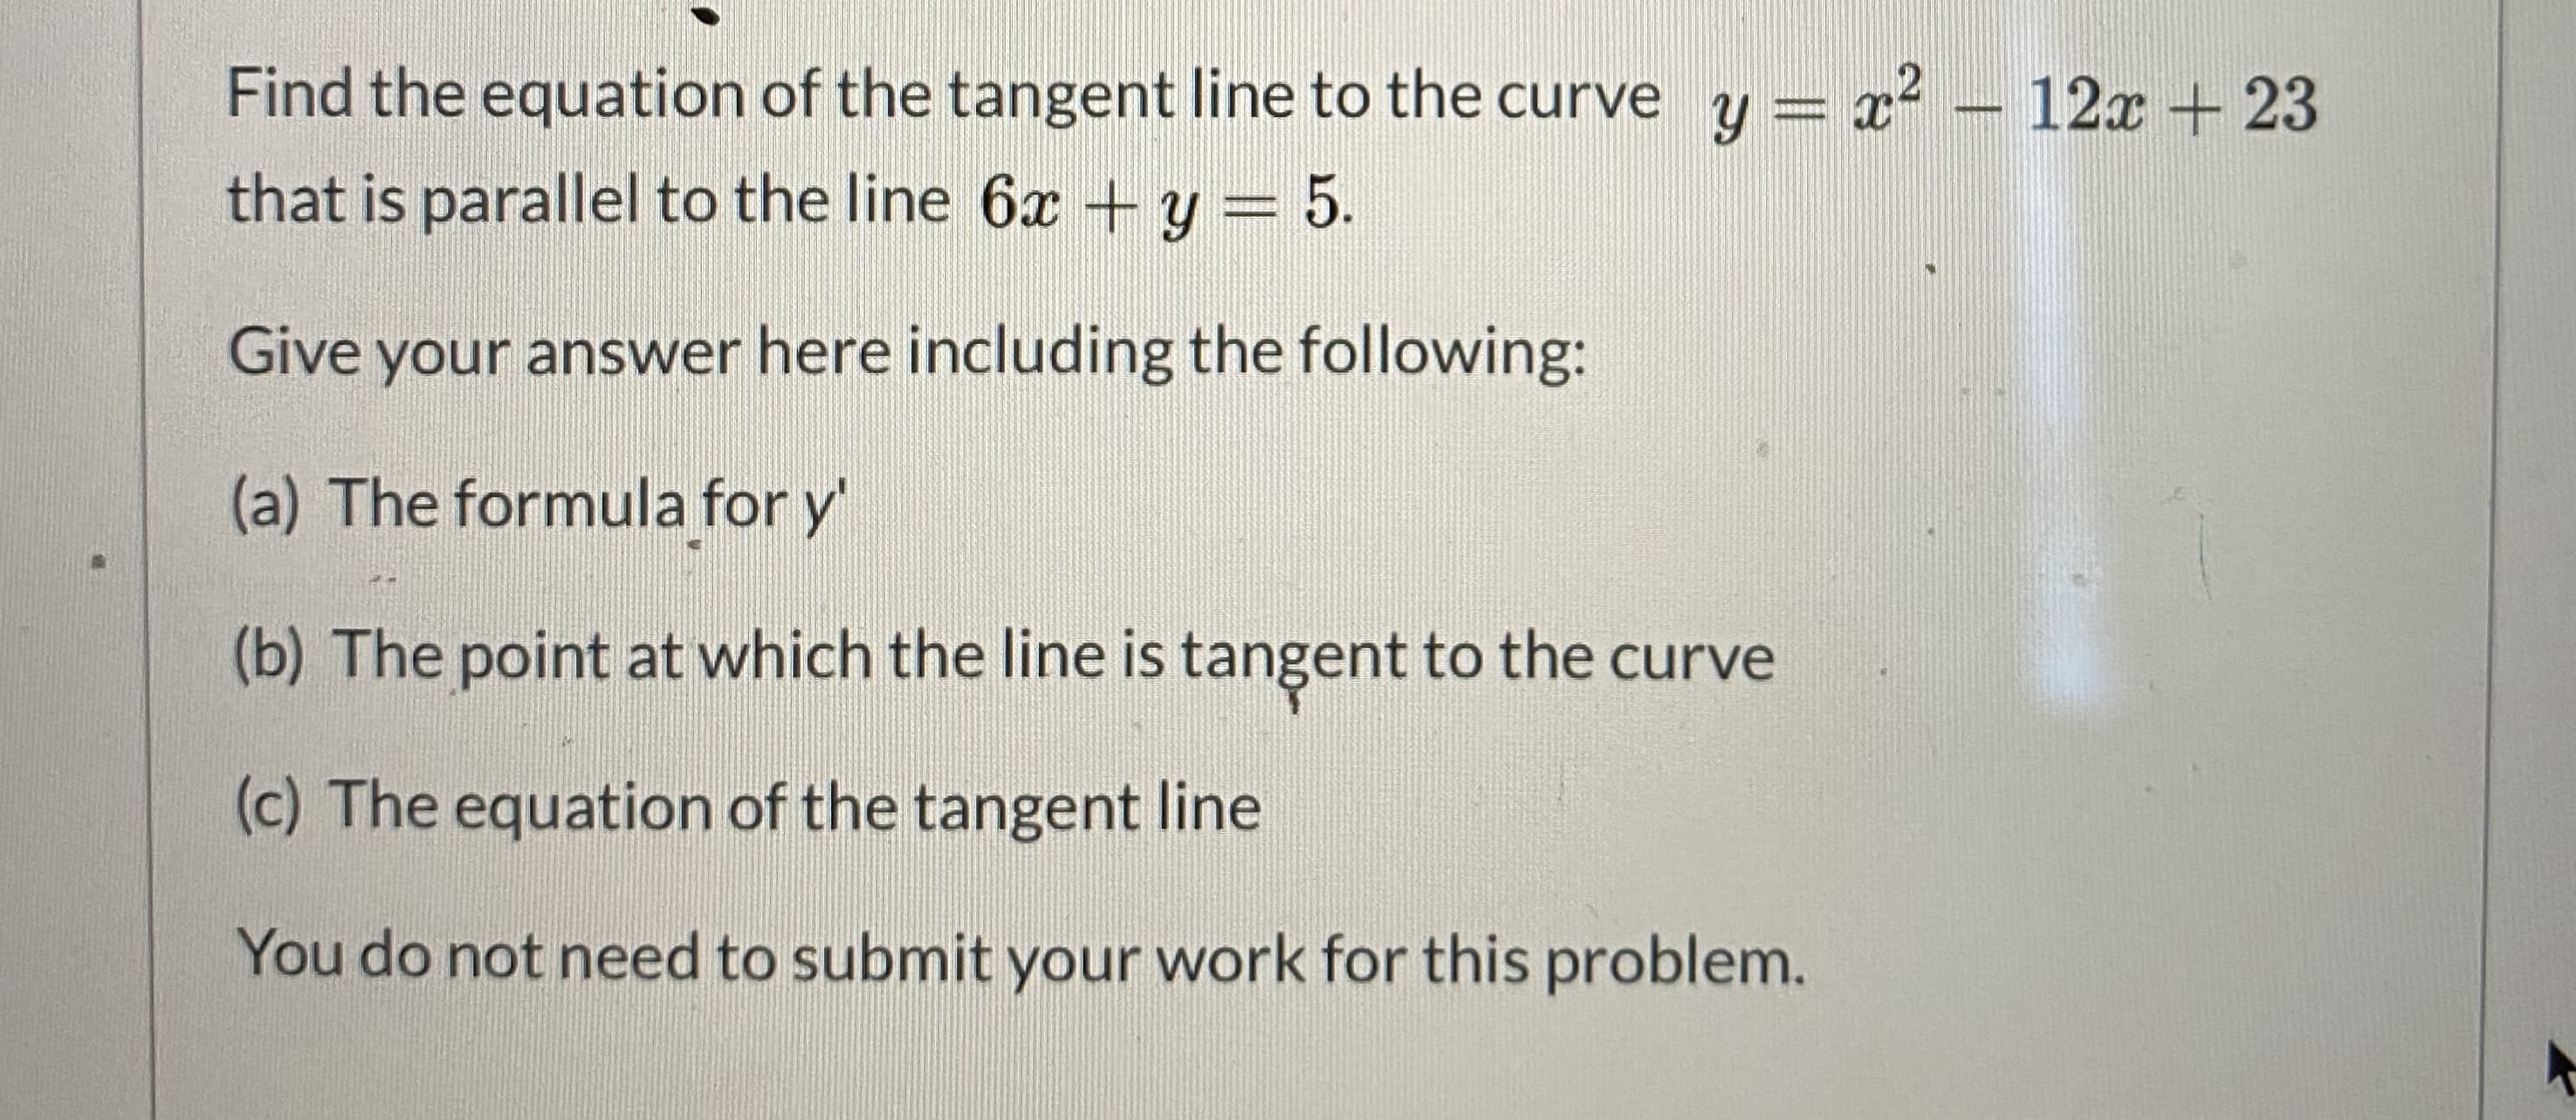 Find the equation of the tangent line to the curve y = x? – 12x + 23
that is parallel to the line 6x + y = 5.
Give your answer here including the following:
(a) The formula for y'
